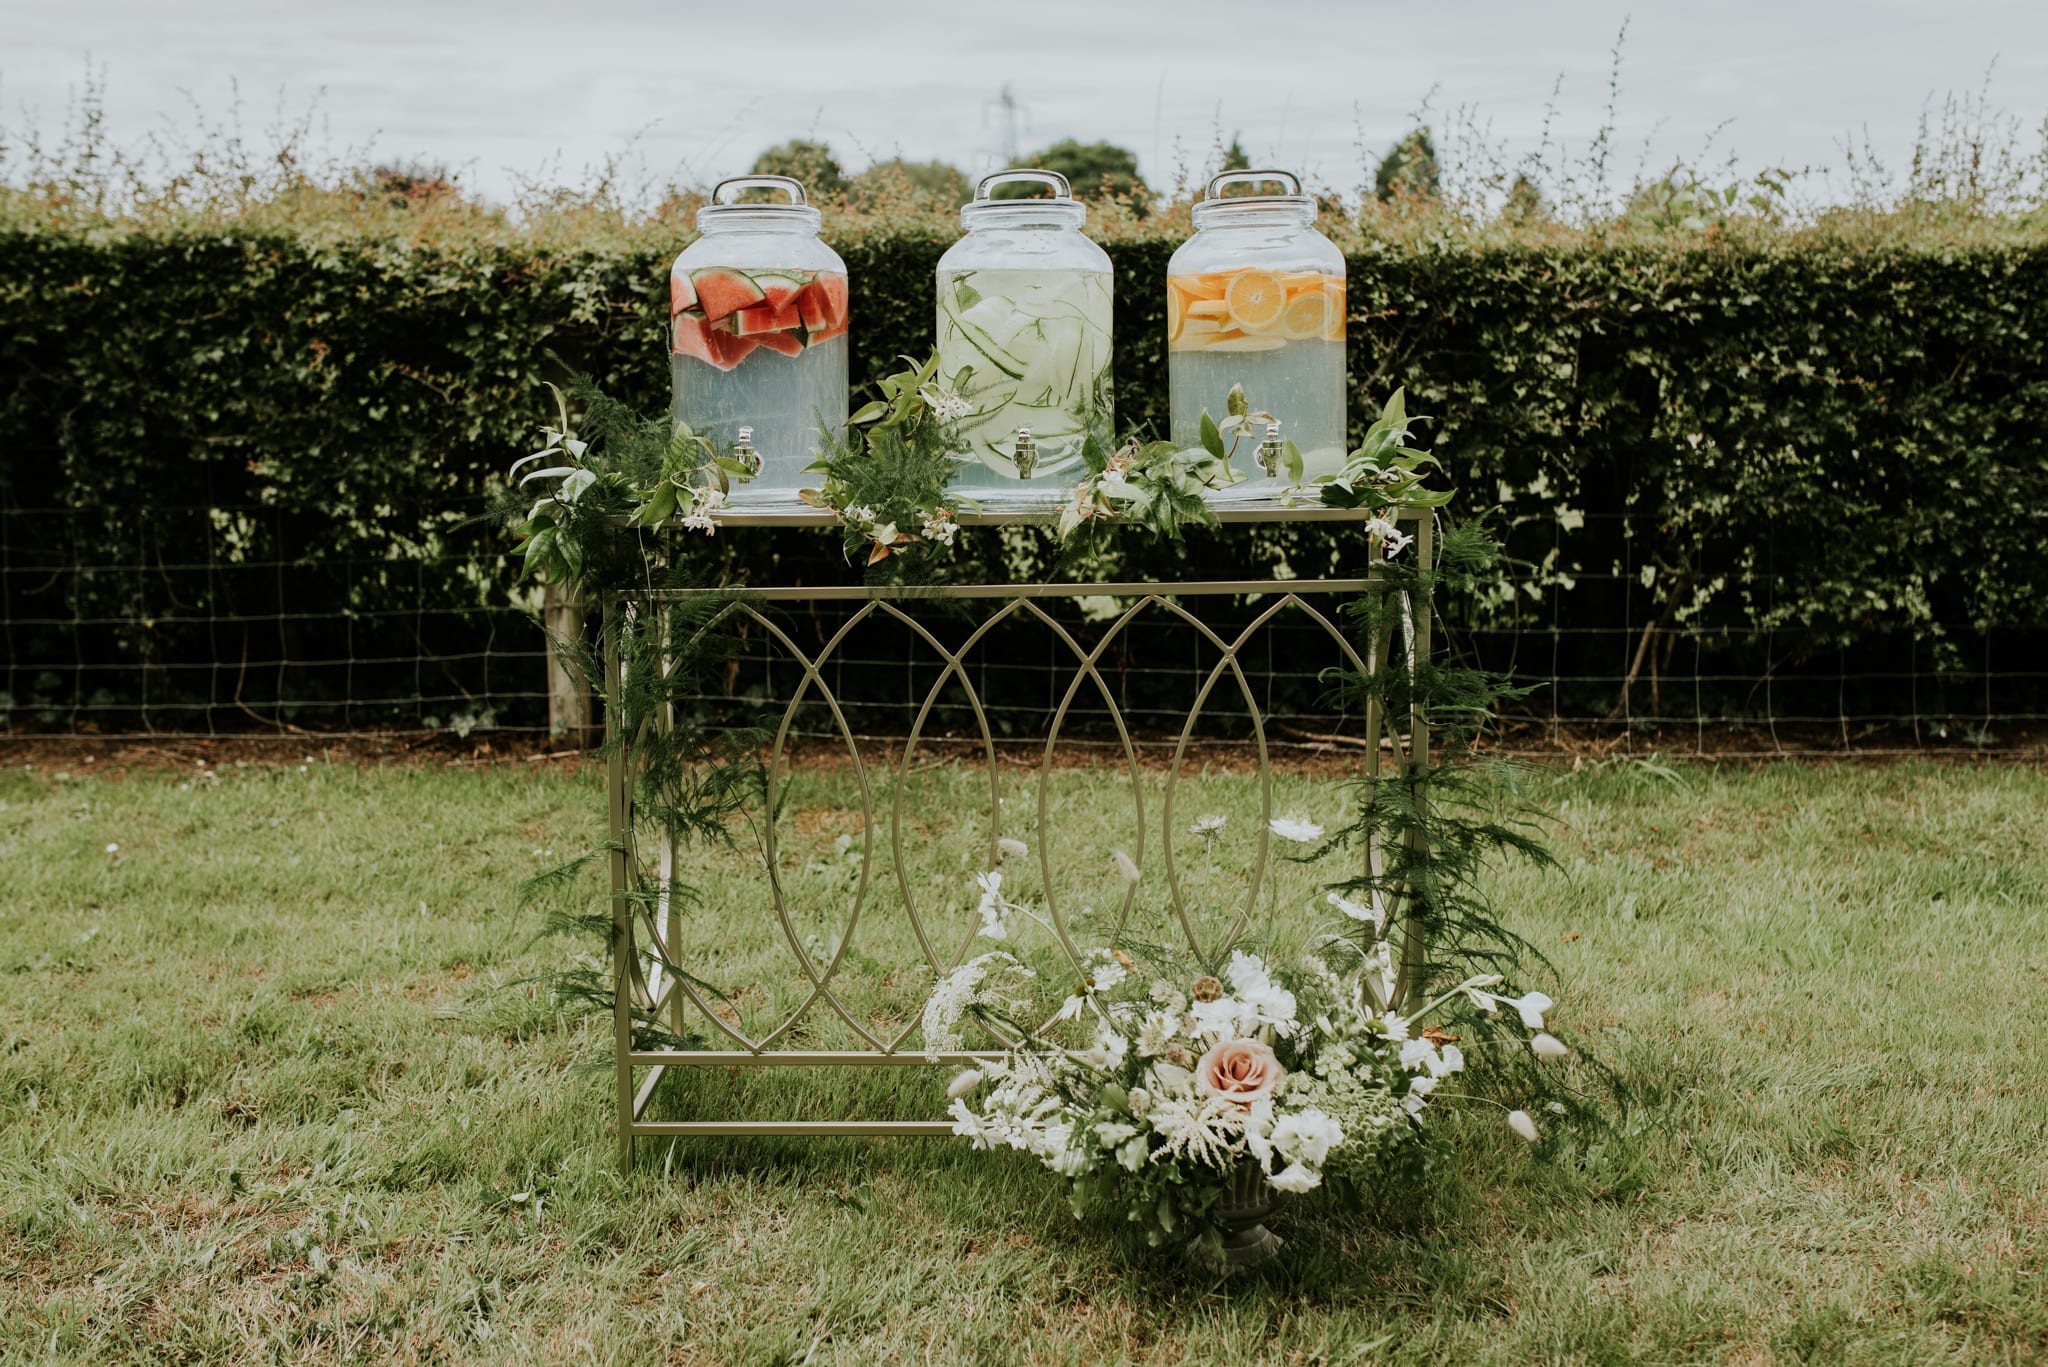 Trio of water dispensers on display for garden wedding